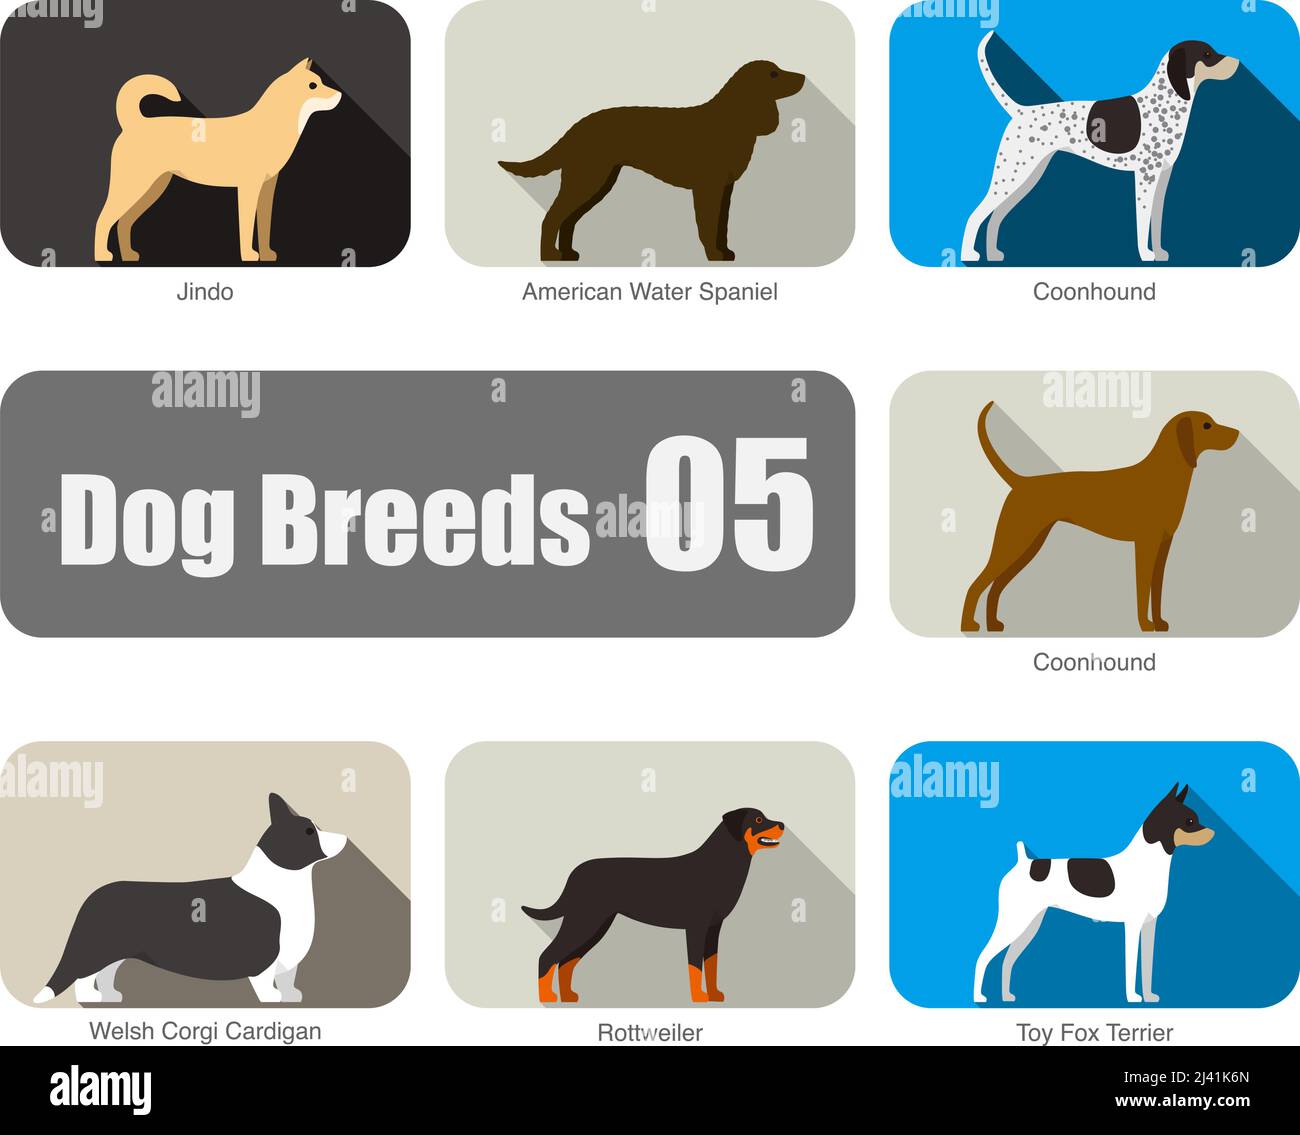 Dog breeds, standing on the ground, side view, vector illustration, dog cartoon image series Stock Vector